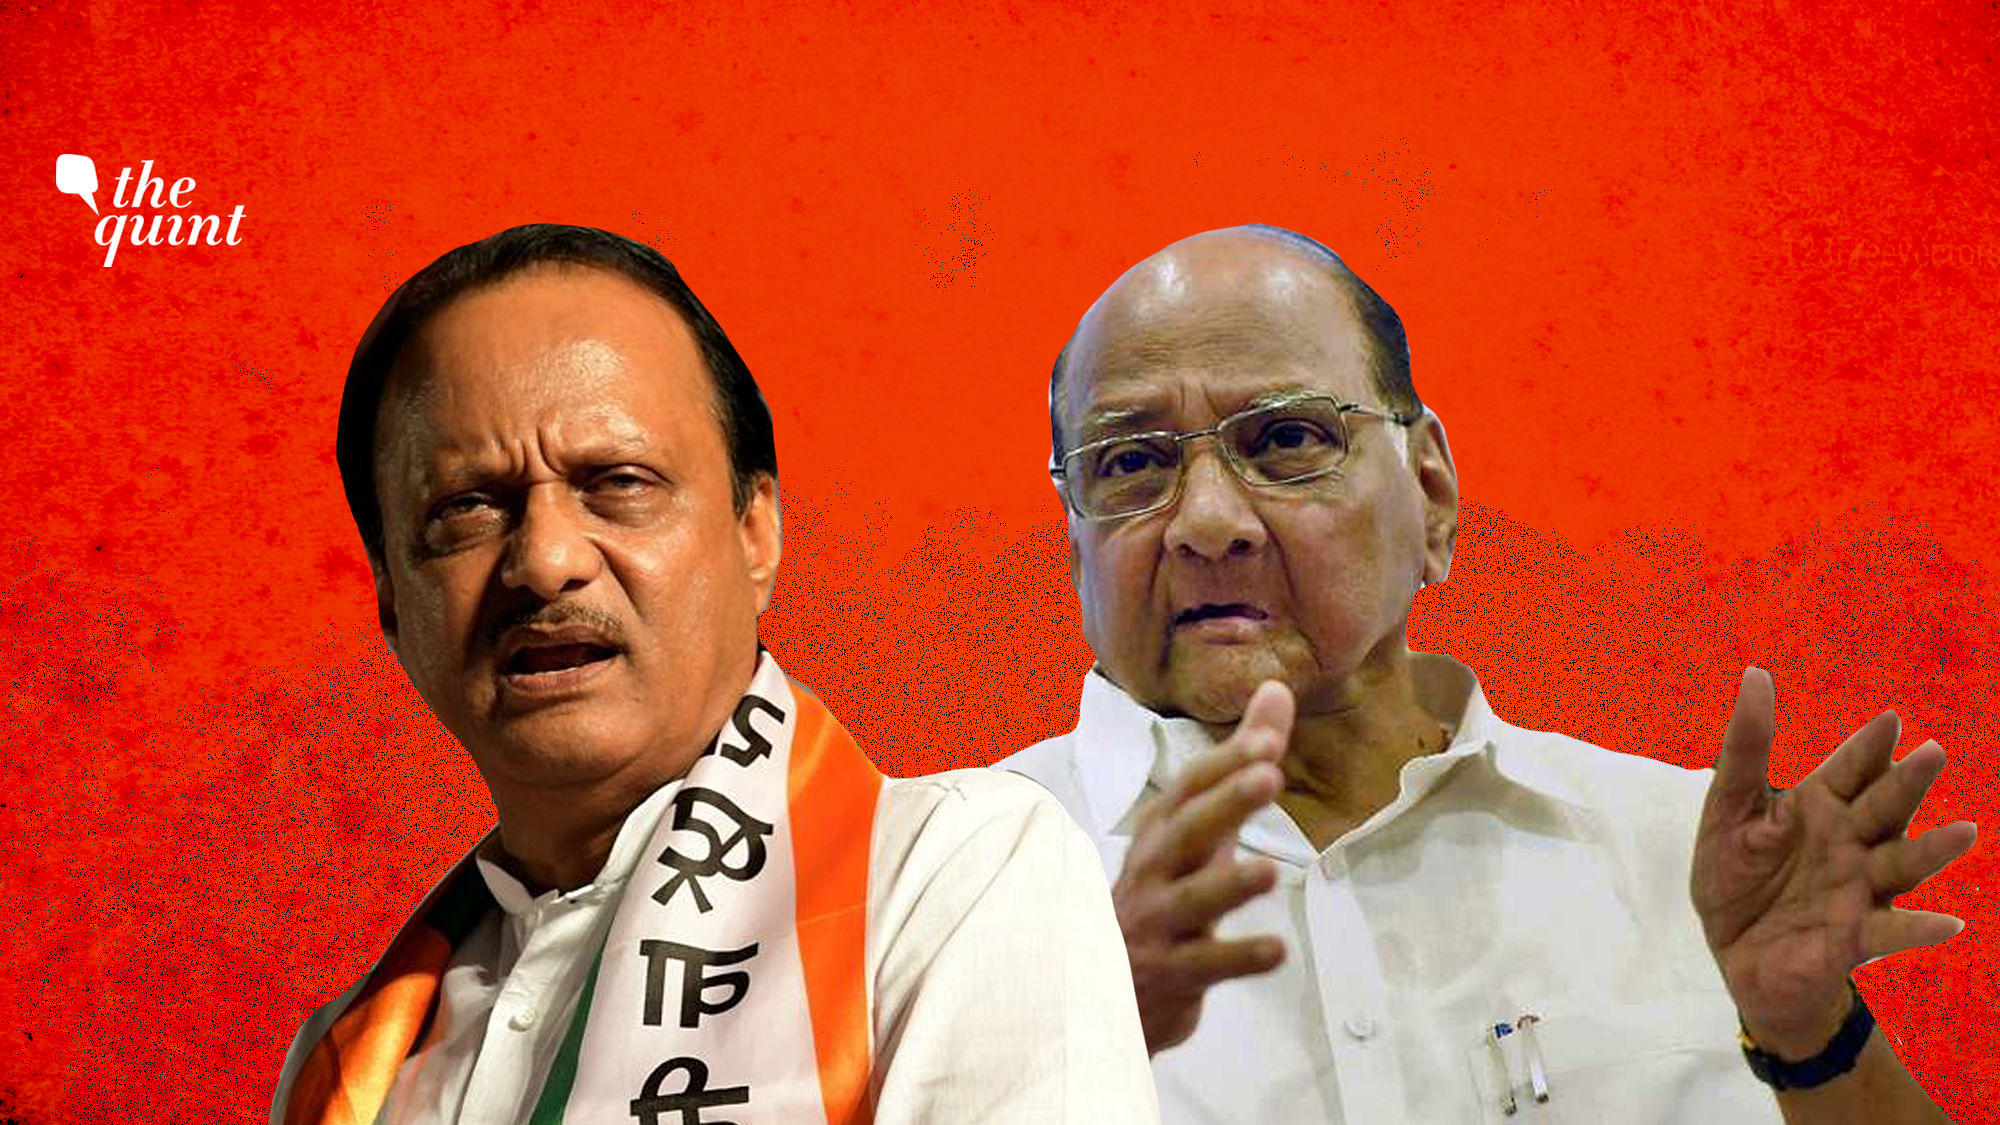 Troubled uncle-nephew relationships have rocked the boat of more than one party in Maharashtra.